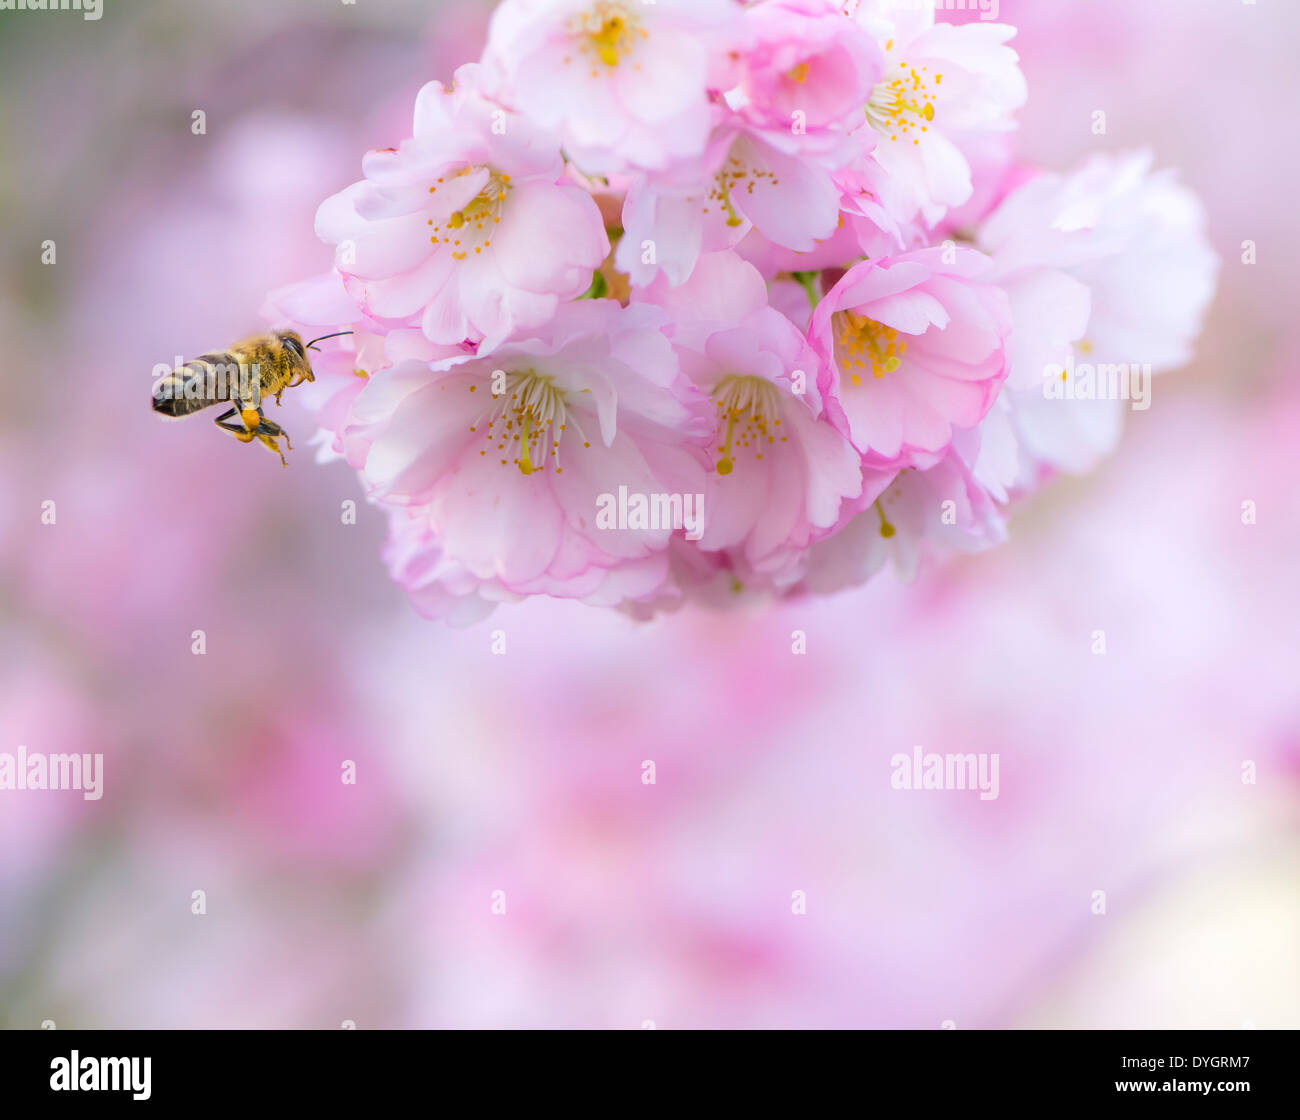 Honeybee approaching pink cherry blossoms Stock Photo